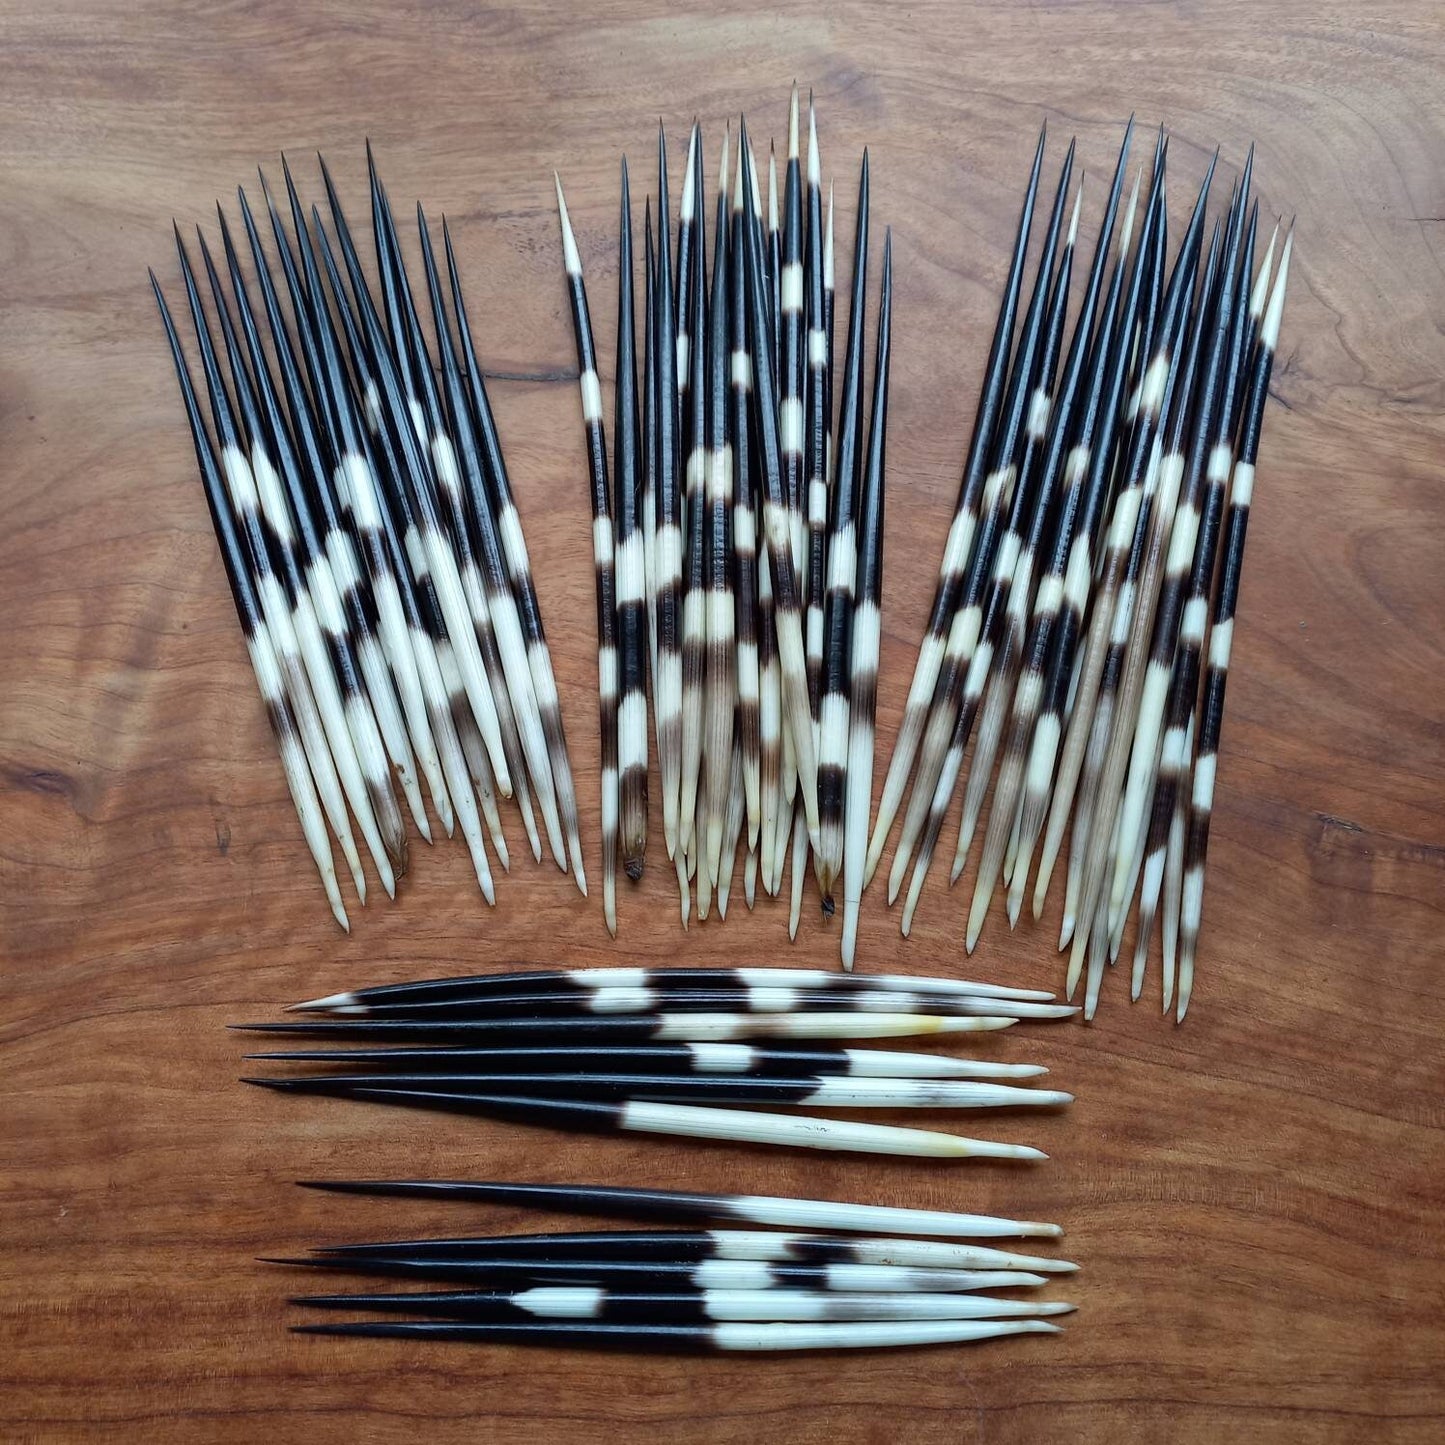 Thick African Porcupine Quills